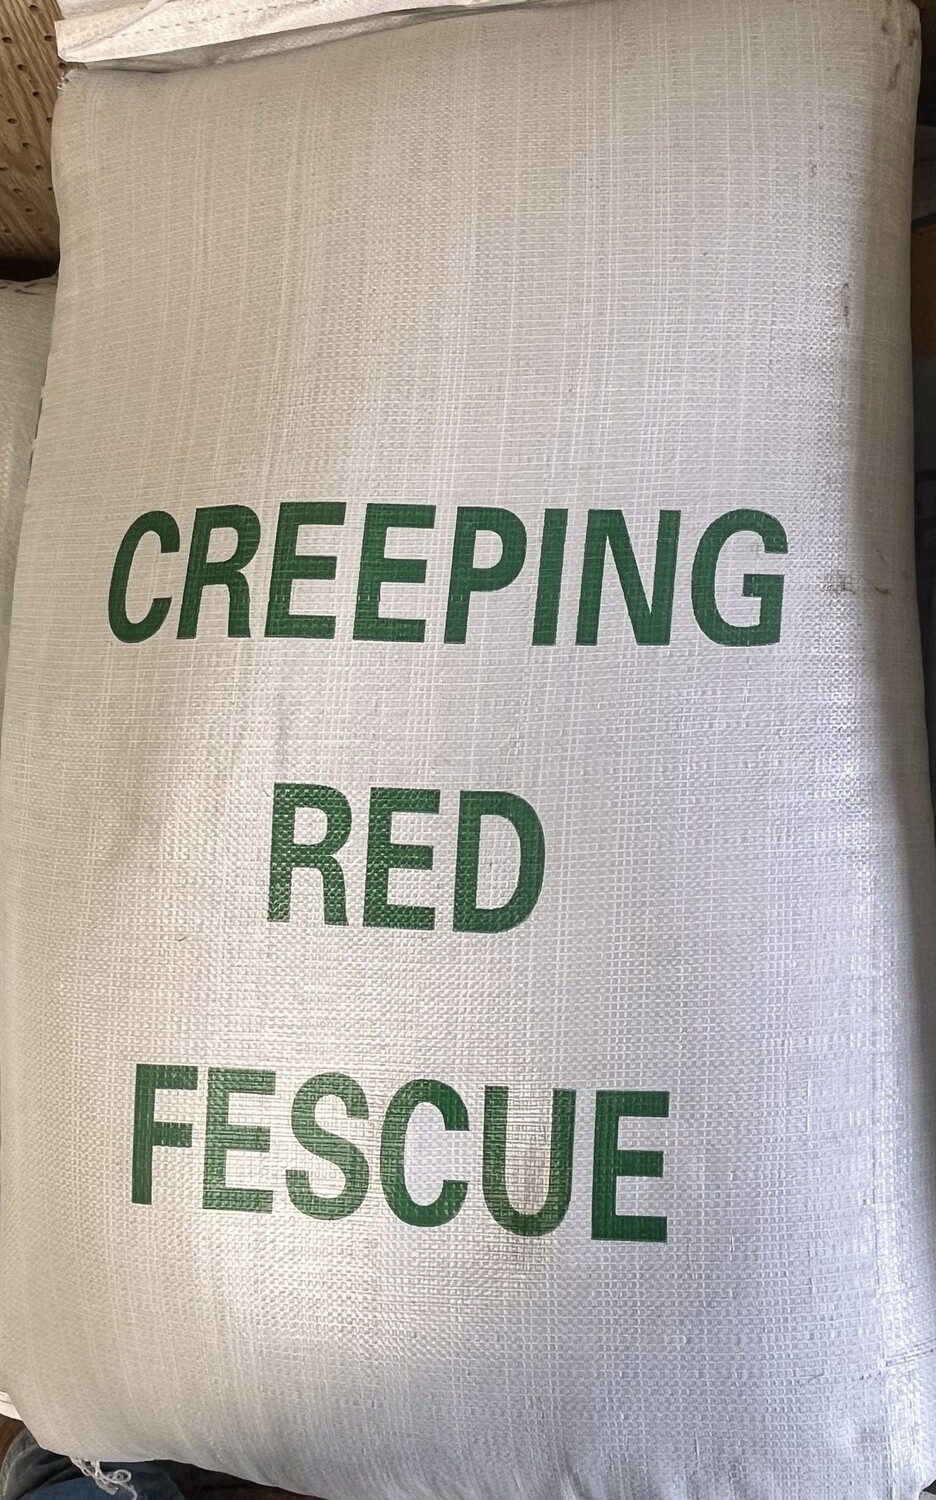 Creeping Red Grass Seed-50 LB or Pound